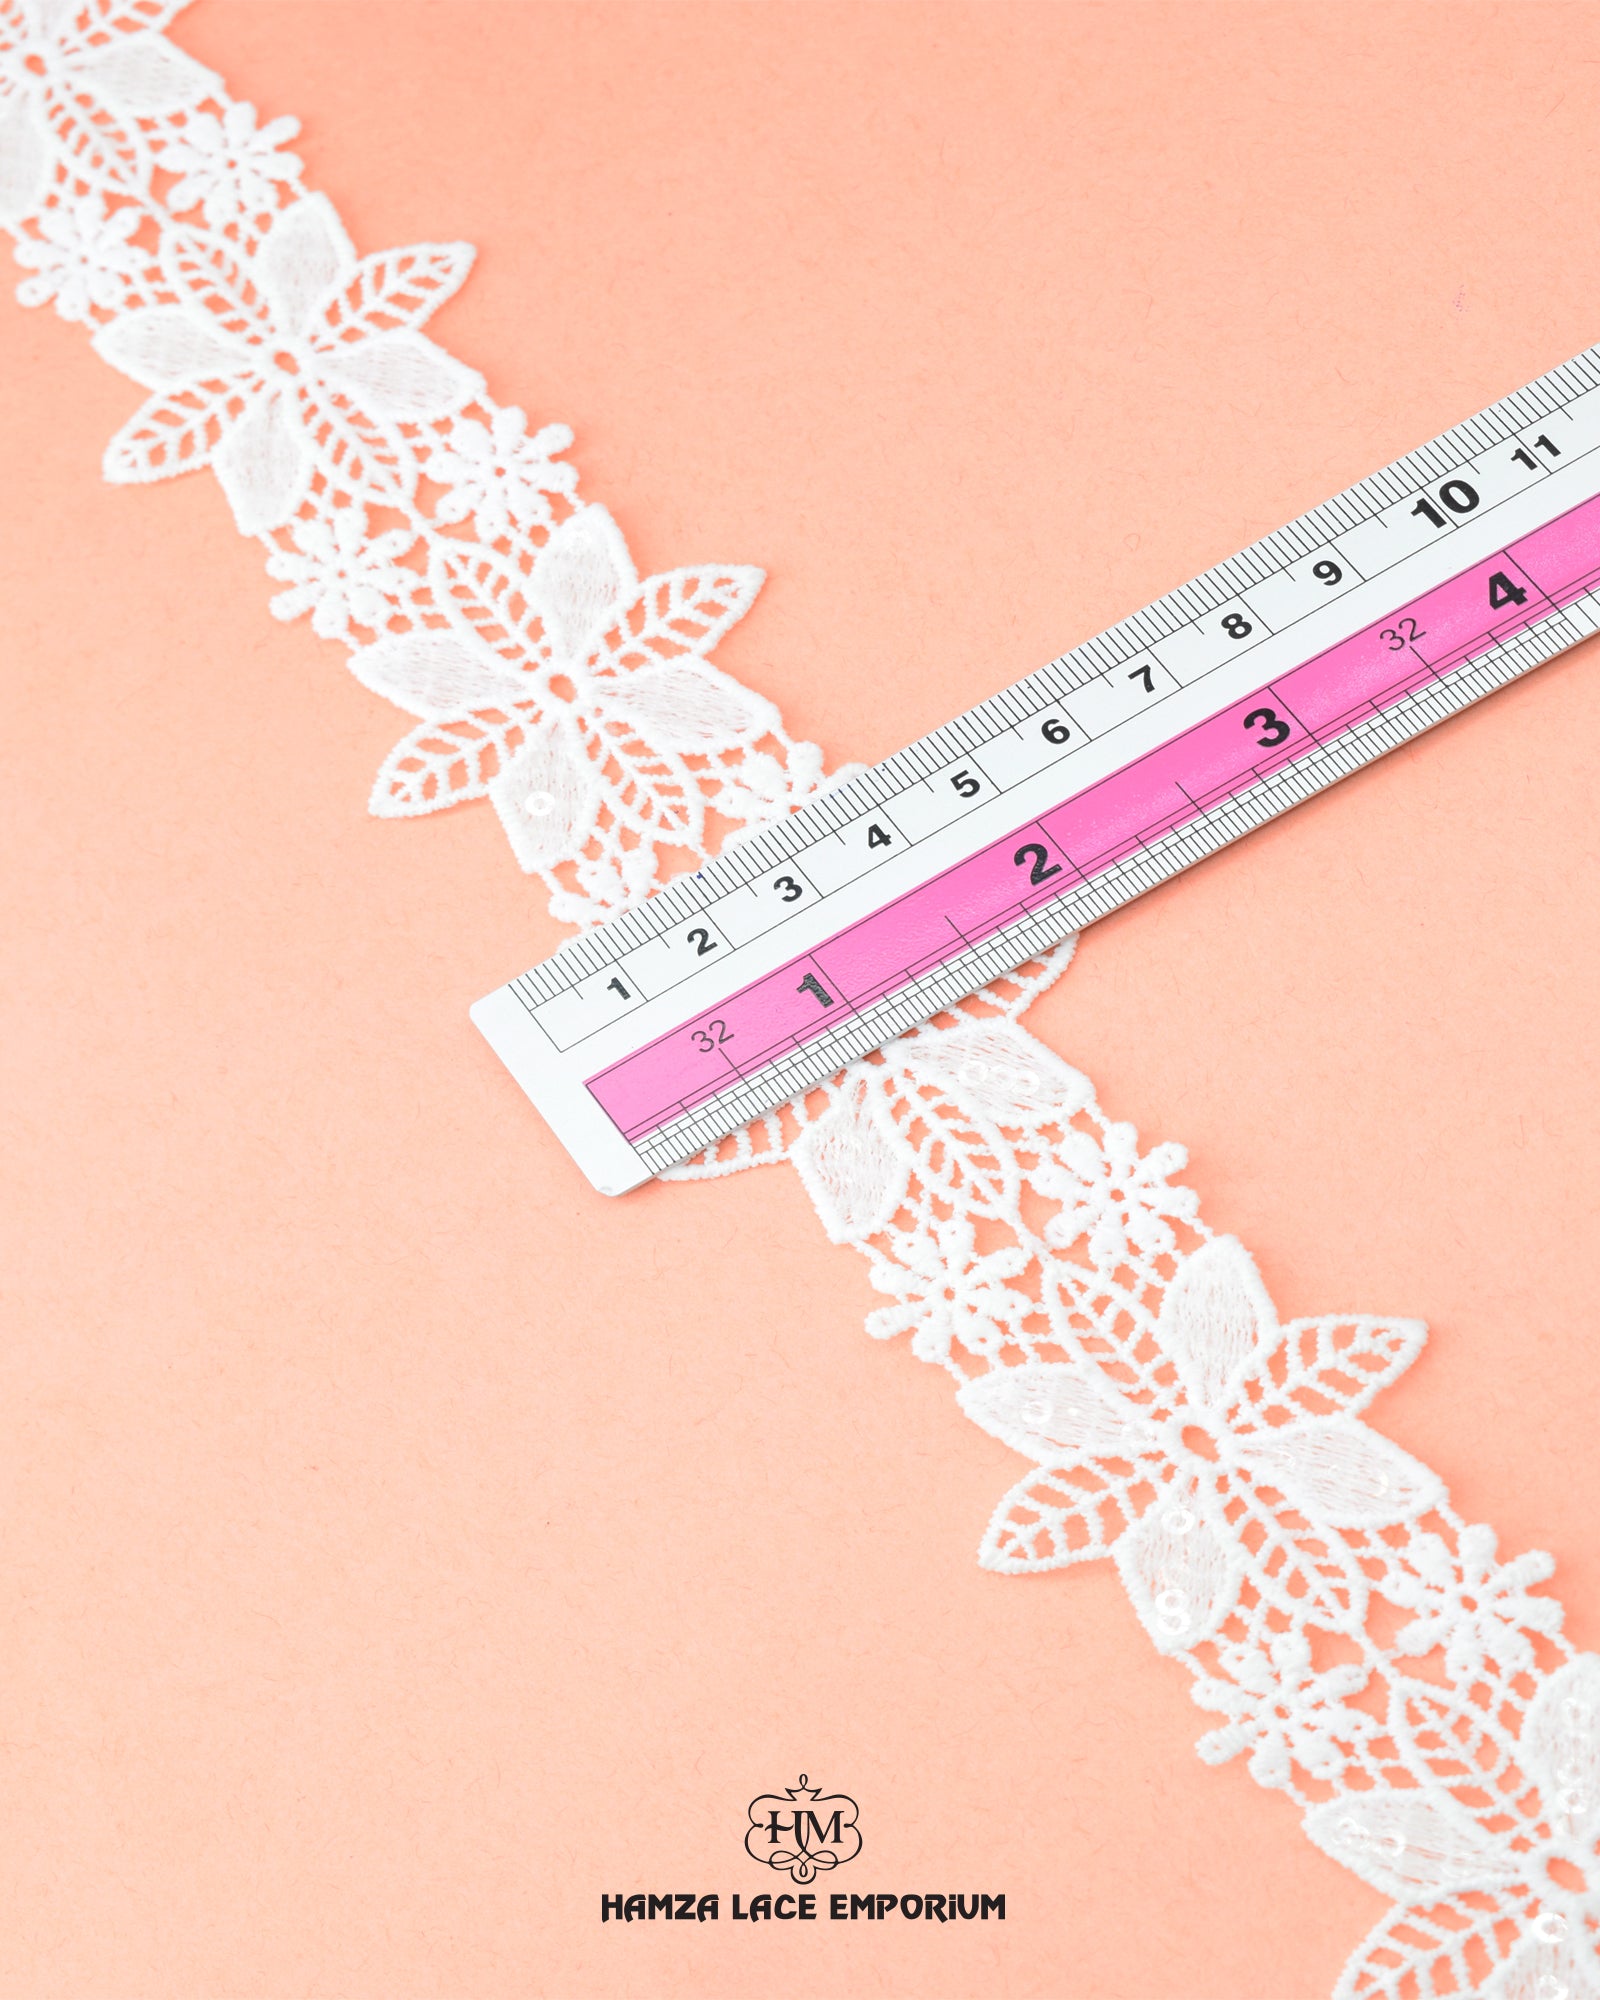 The size of the 'Center Flower Lace 23053' is given as '2' inches by placing a ruler on it